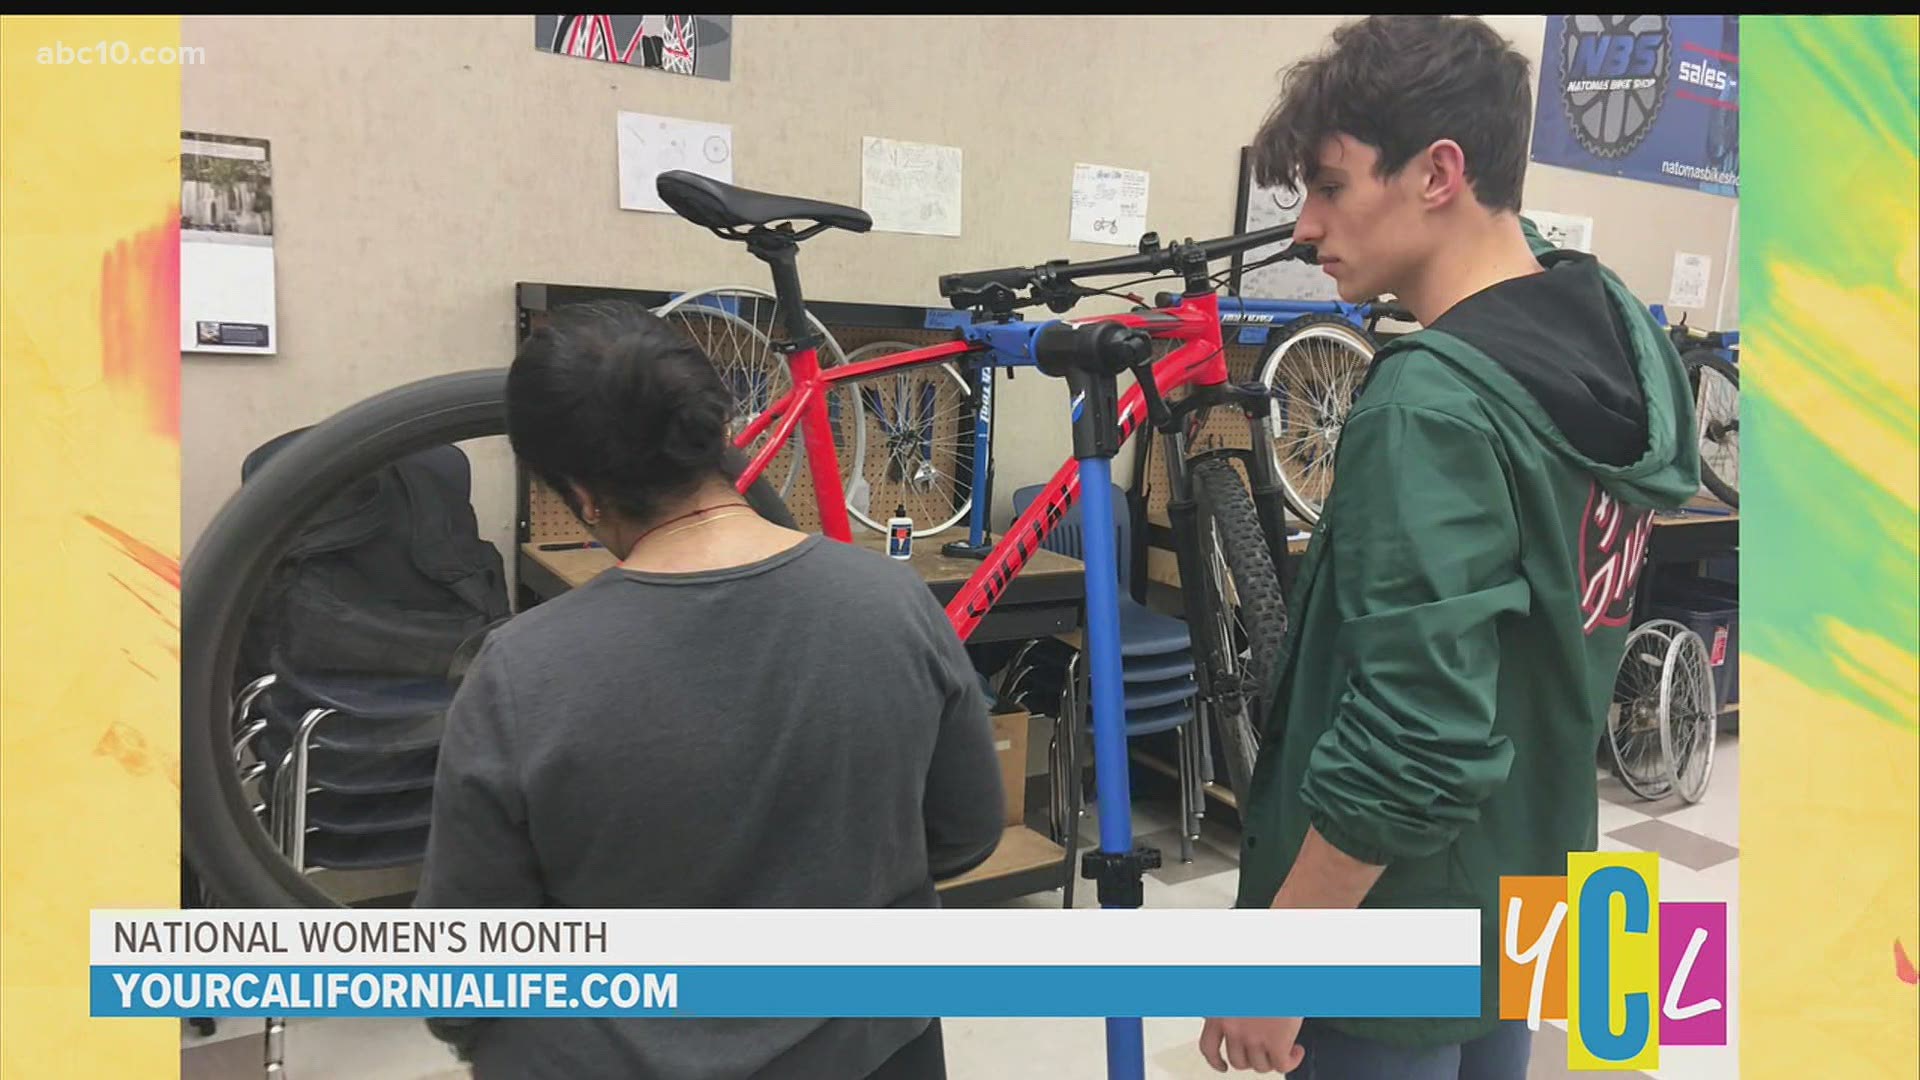 Inderkum High School teacher Elle Steele is taking a "two tire" approach to teaching students technical career skills related to bike technology.